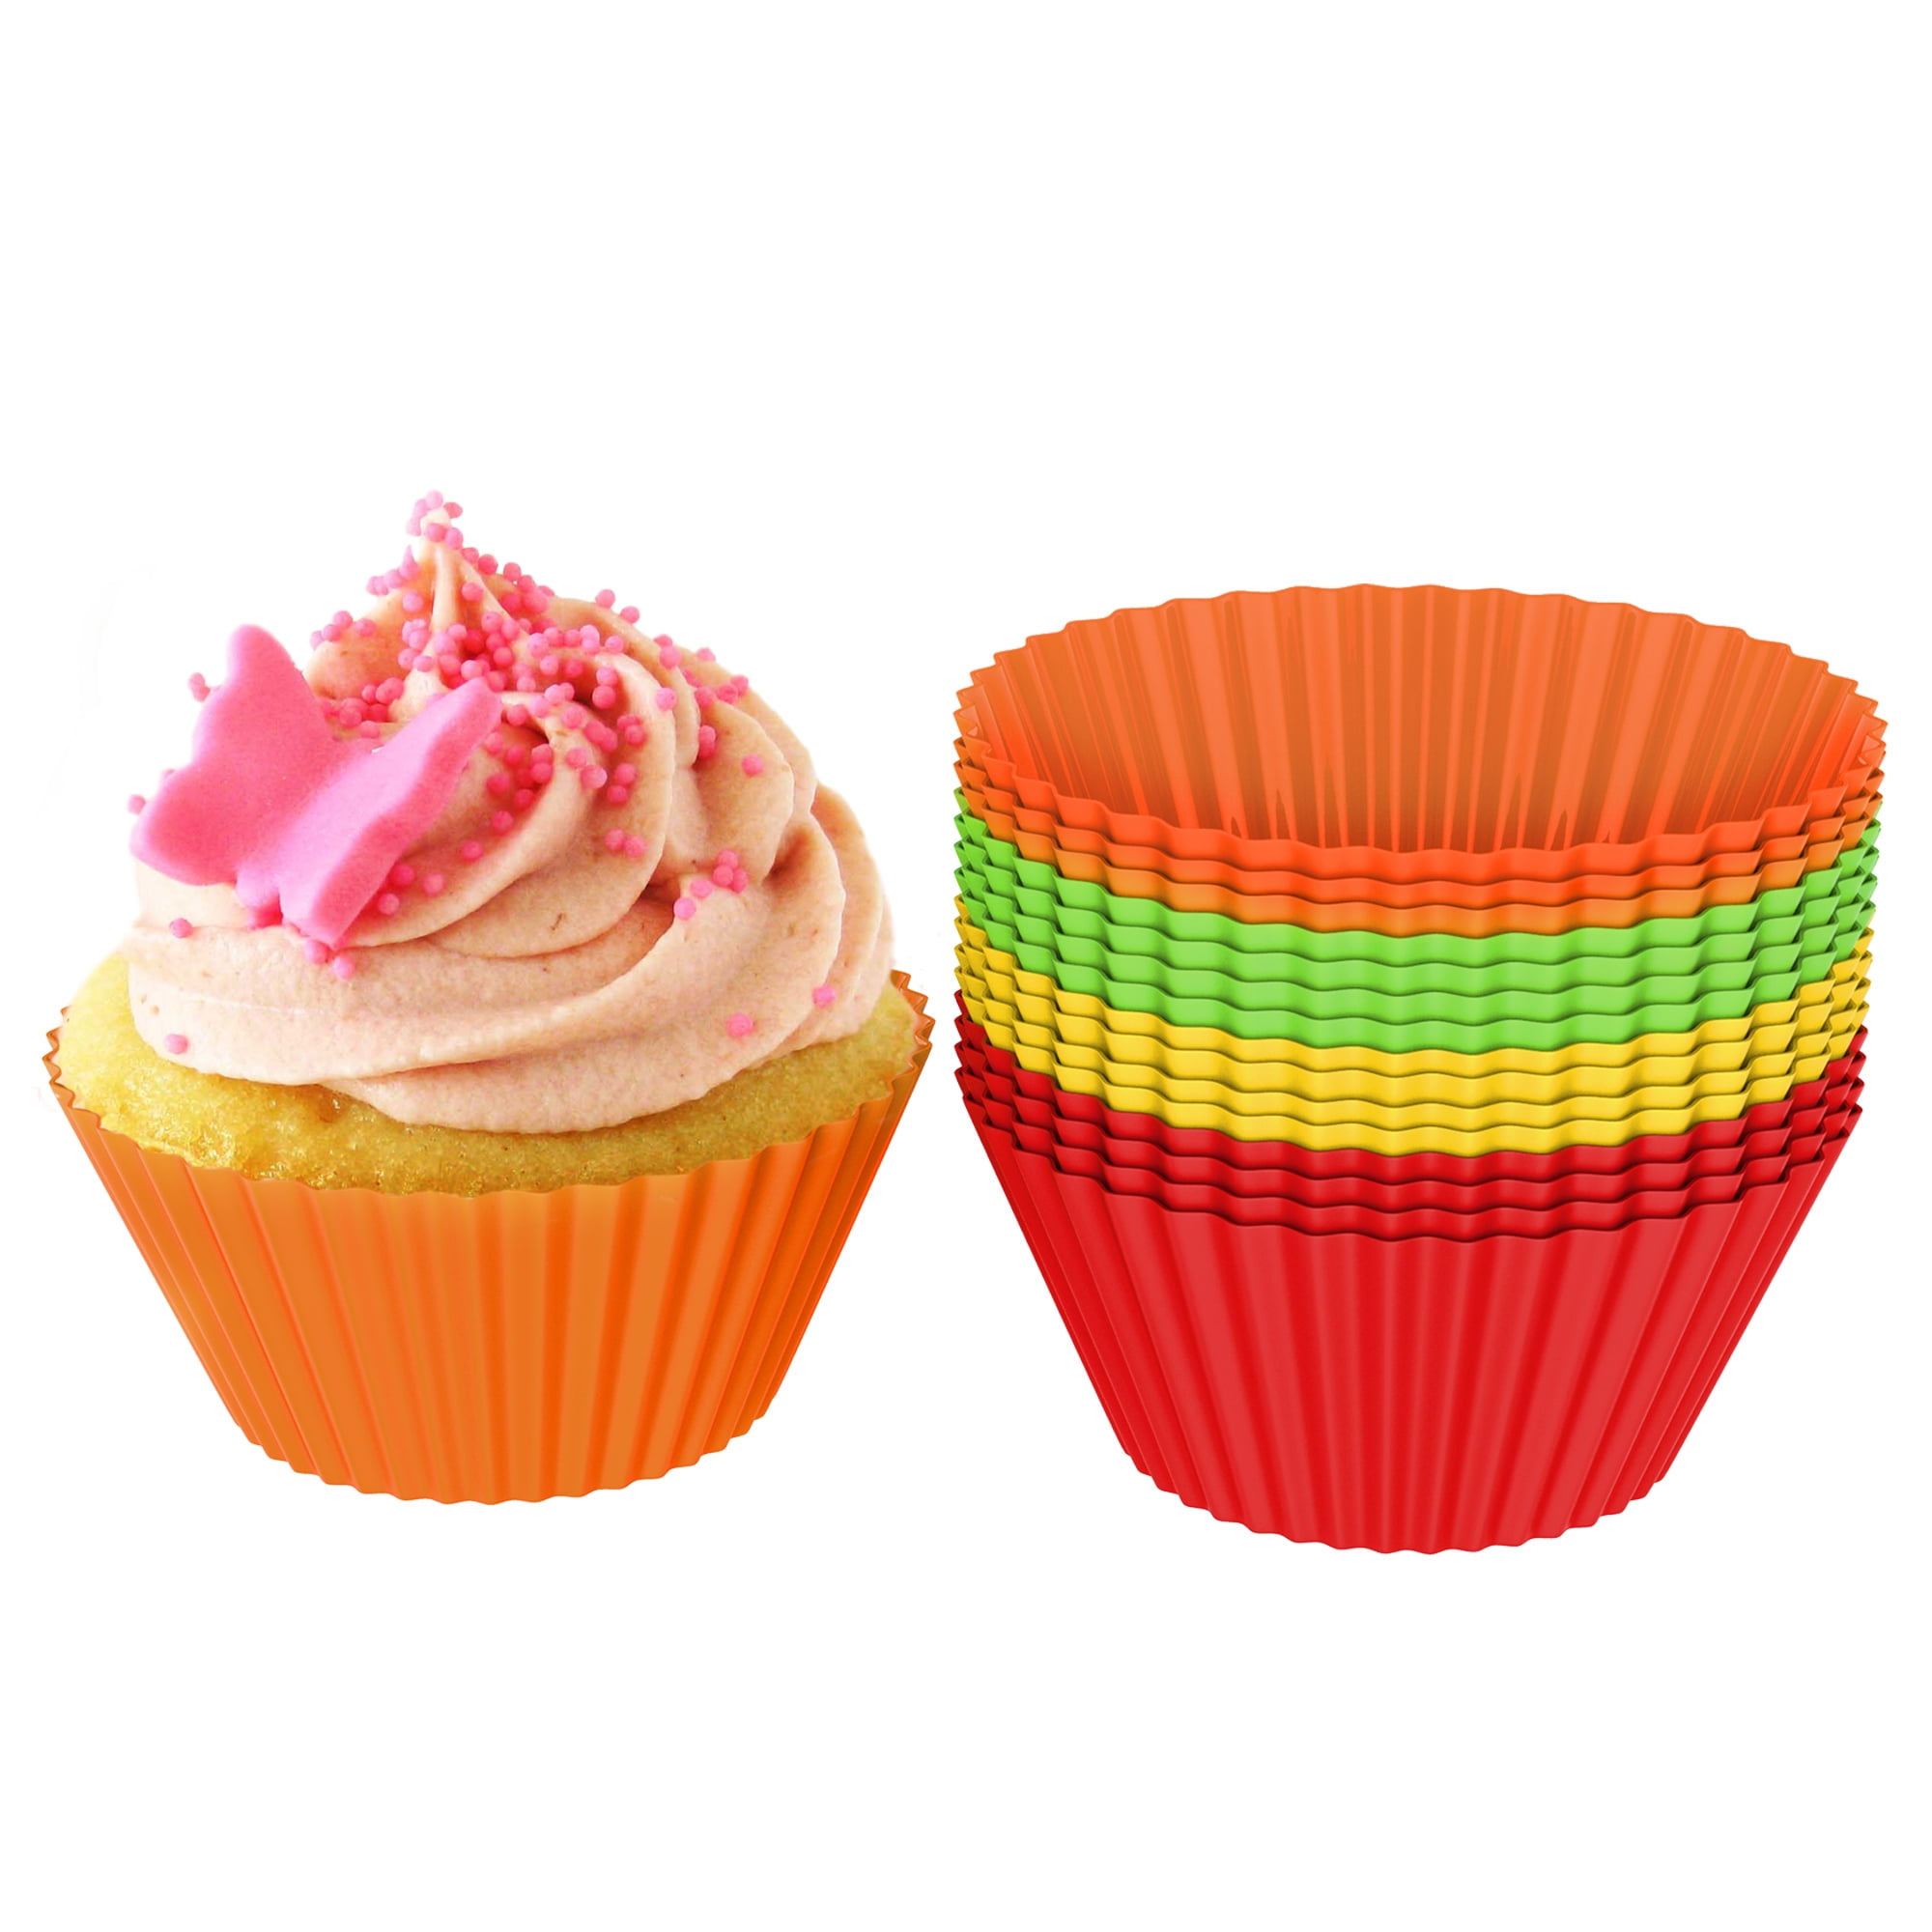 2x Soft Silicone Cake Muffin Chocolate Cupcake Bakeware Baking Cup Liners Mold. 